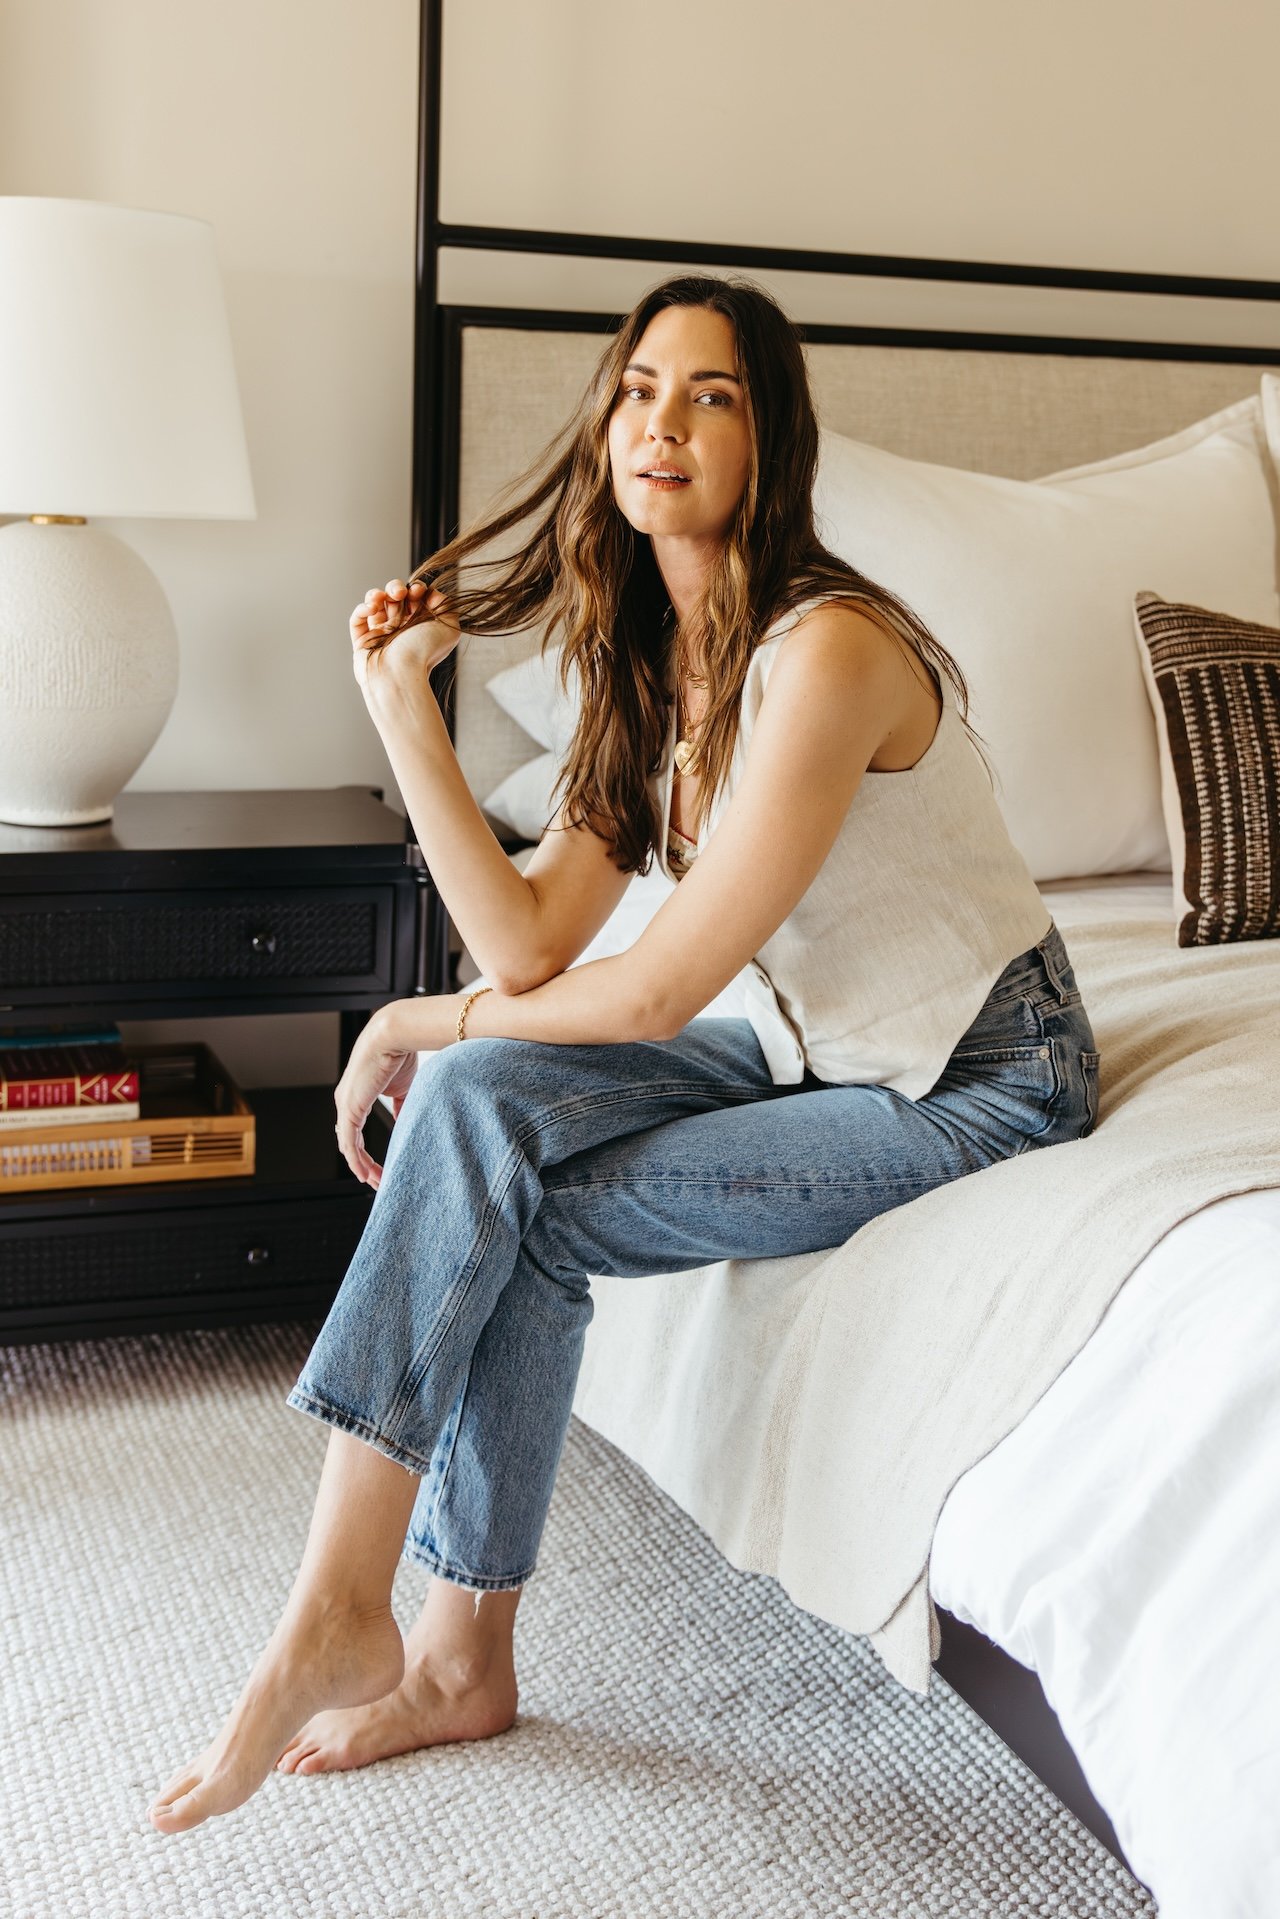 Odette Annable Starts Her Day With Small Moments of Happy—Here’s How This Mom of 2 and Actress Gets It Done